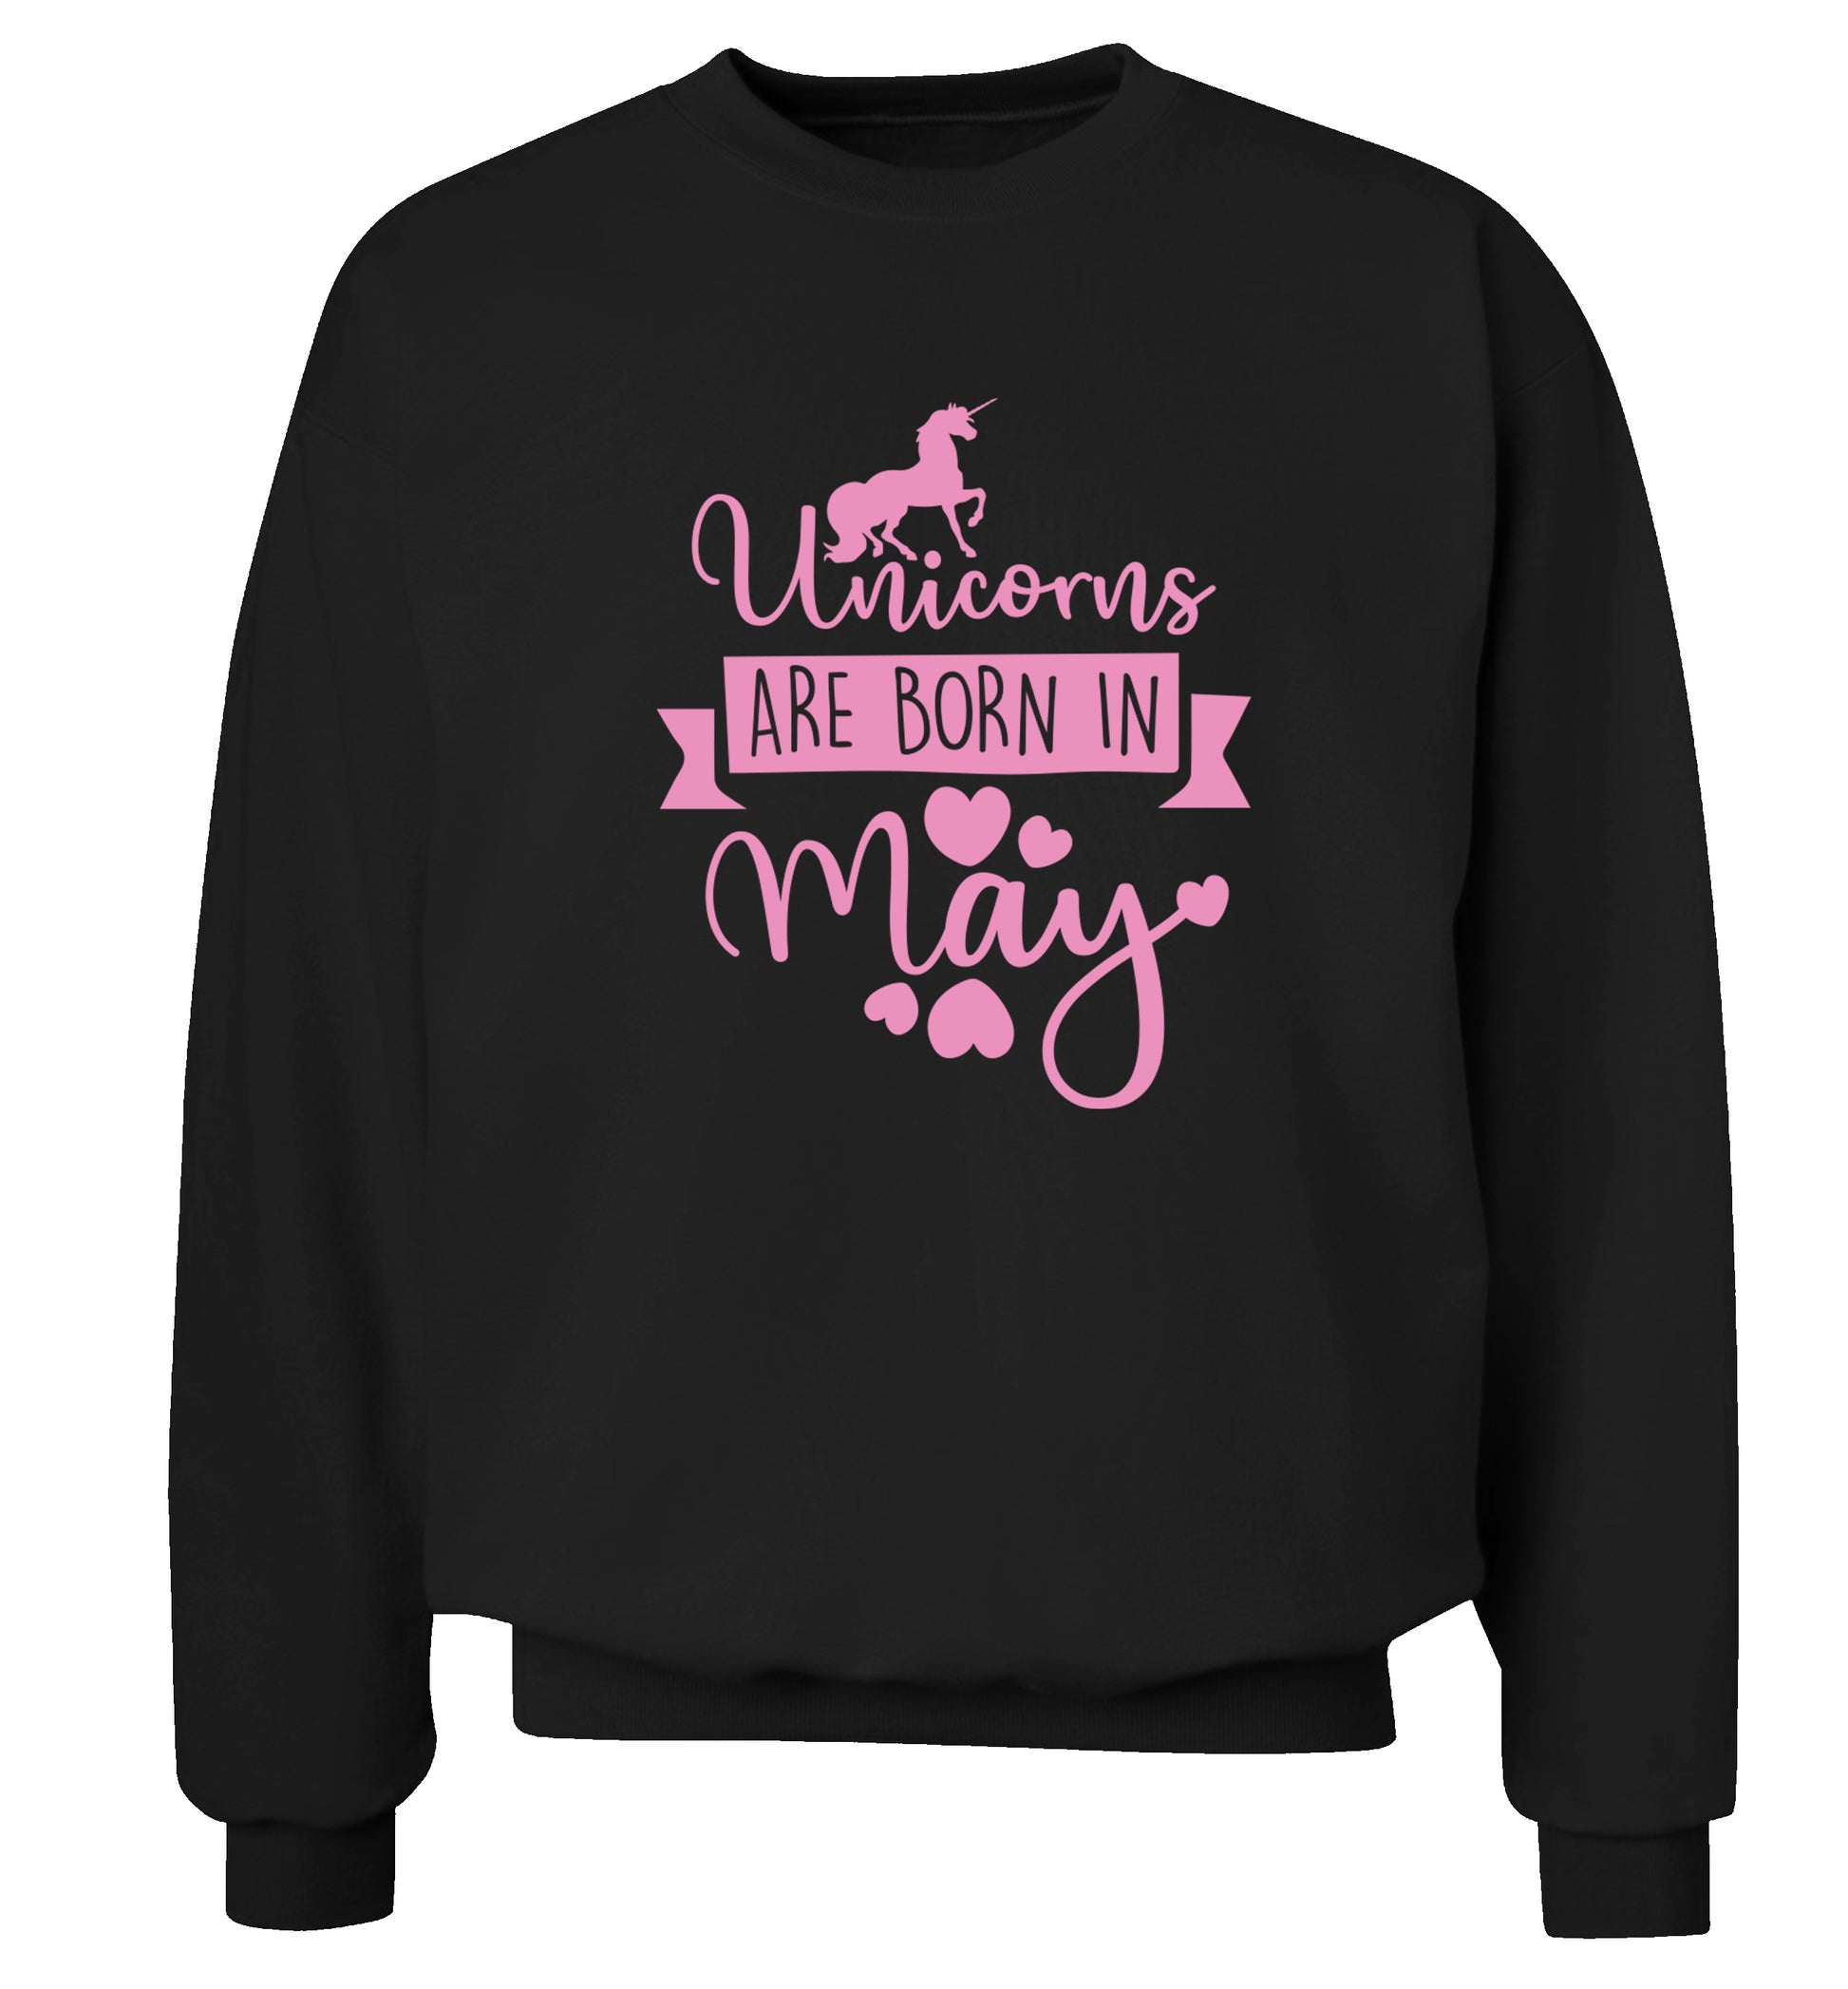 Unicorns are born in May Adult's unisex black Sweater 2XL